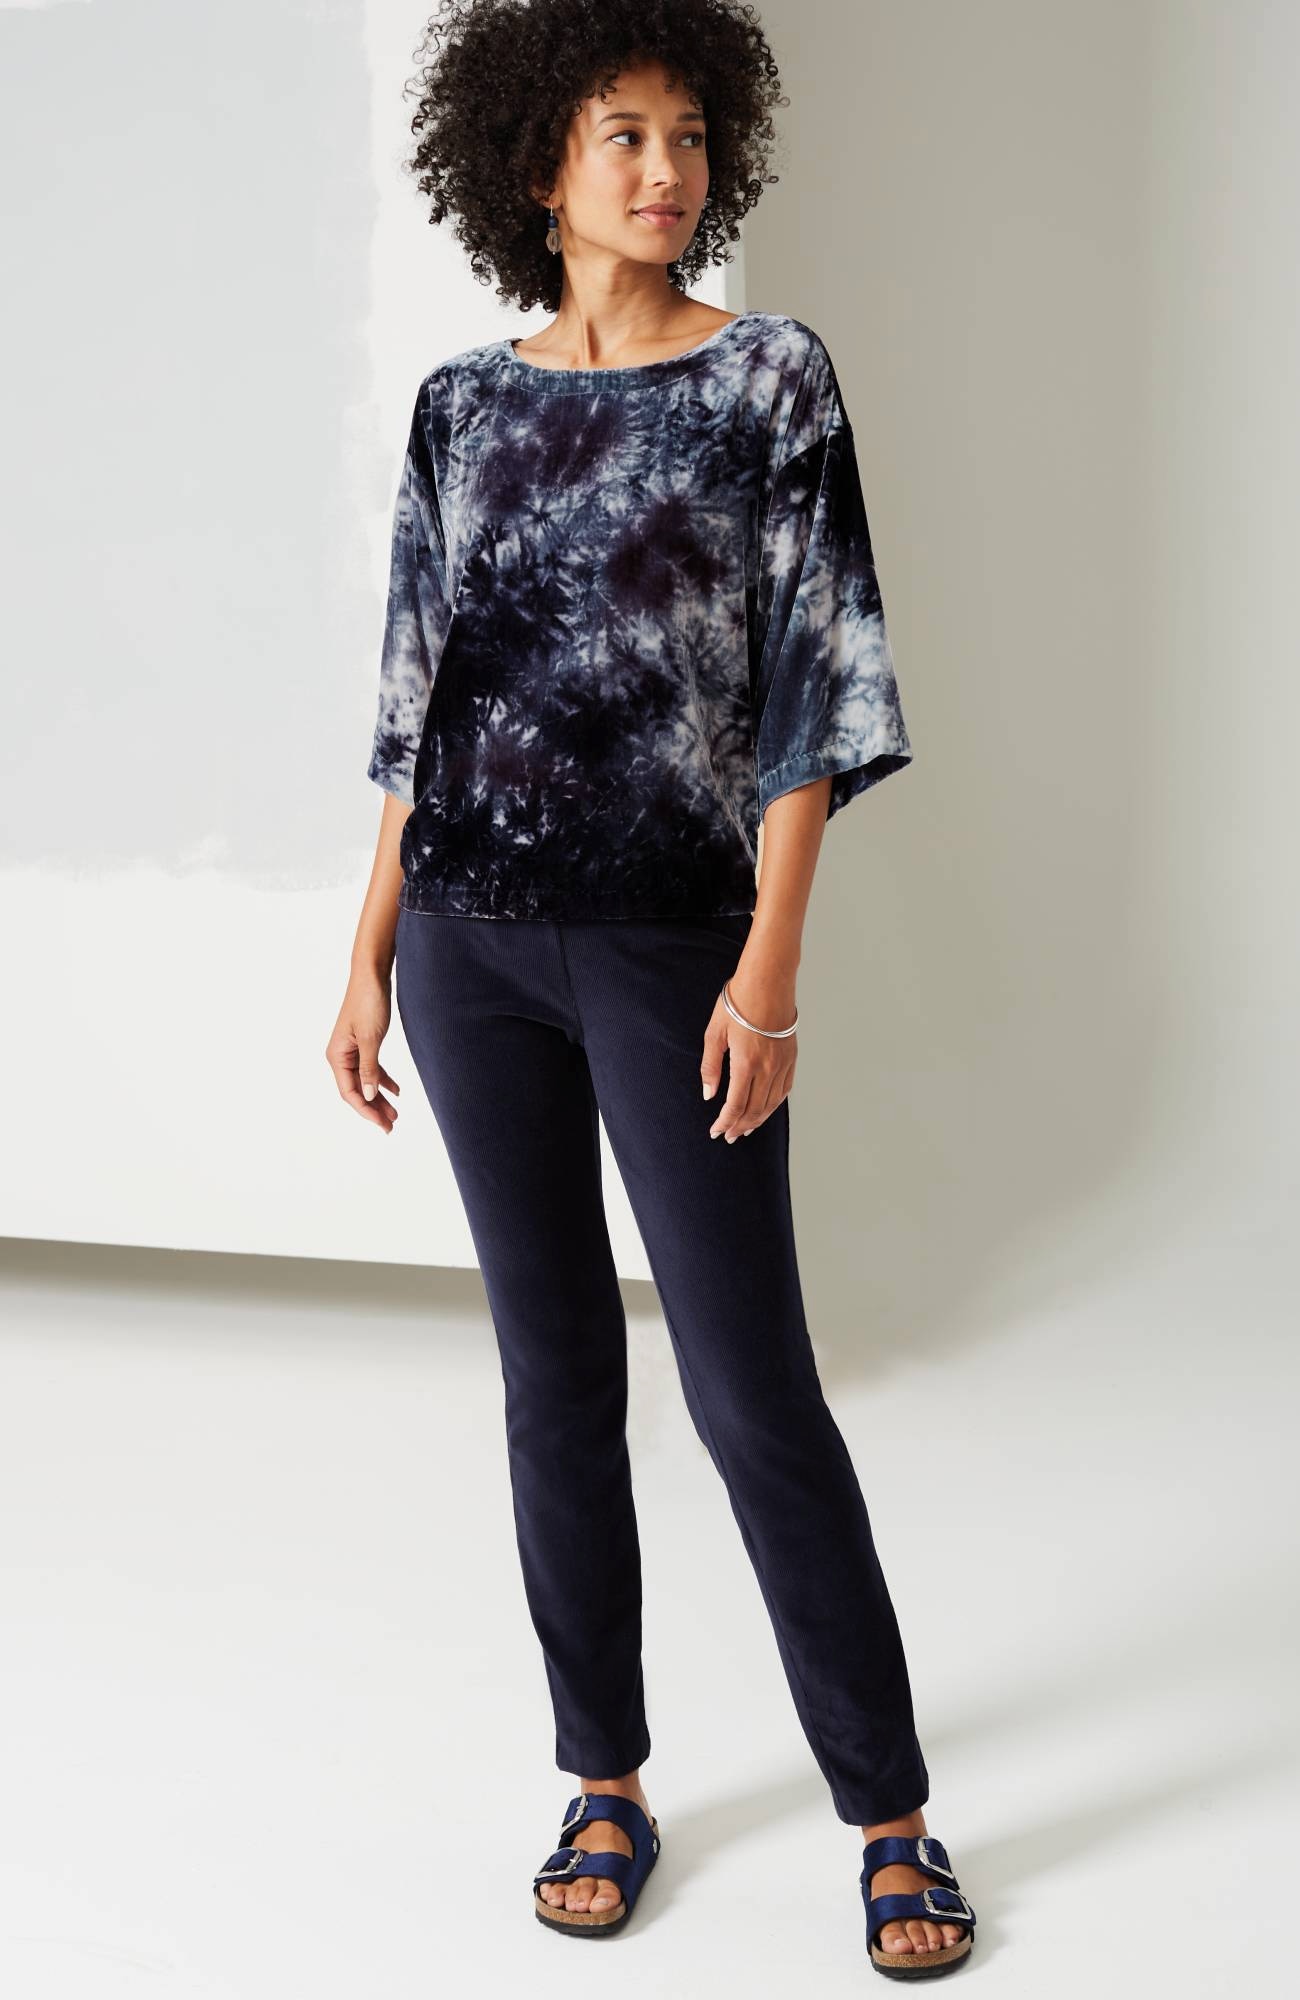 Pure Jill Tie-Dyed Velvet Square-Sleeve Top